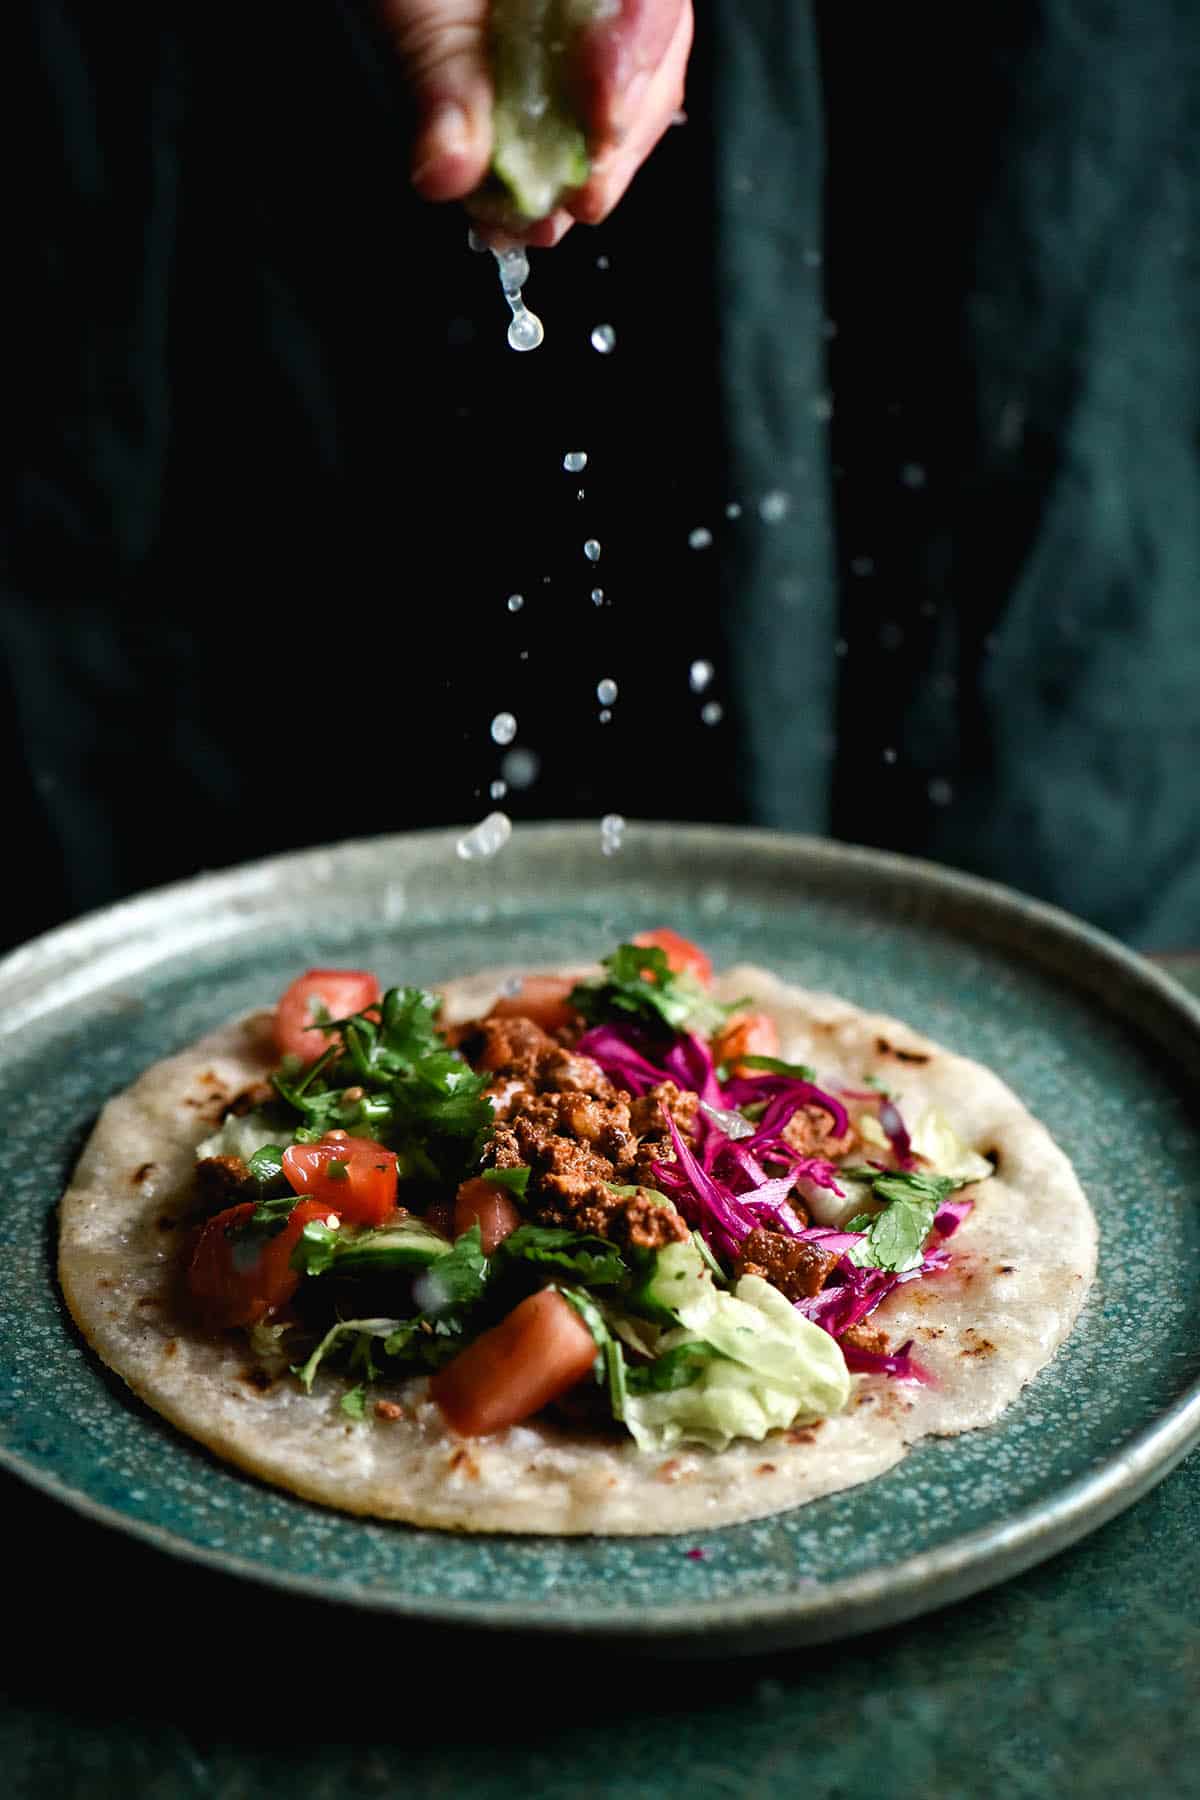 A tortilla sits on an olive green ceramic plate and is topped with vegan taco mince, pickled cabbage and salsa. A hand extends down from the top of the image to squeeze a lime onto the tortilla, set against an olive green backdrop